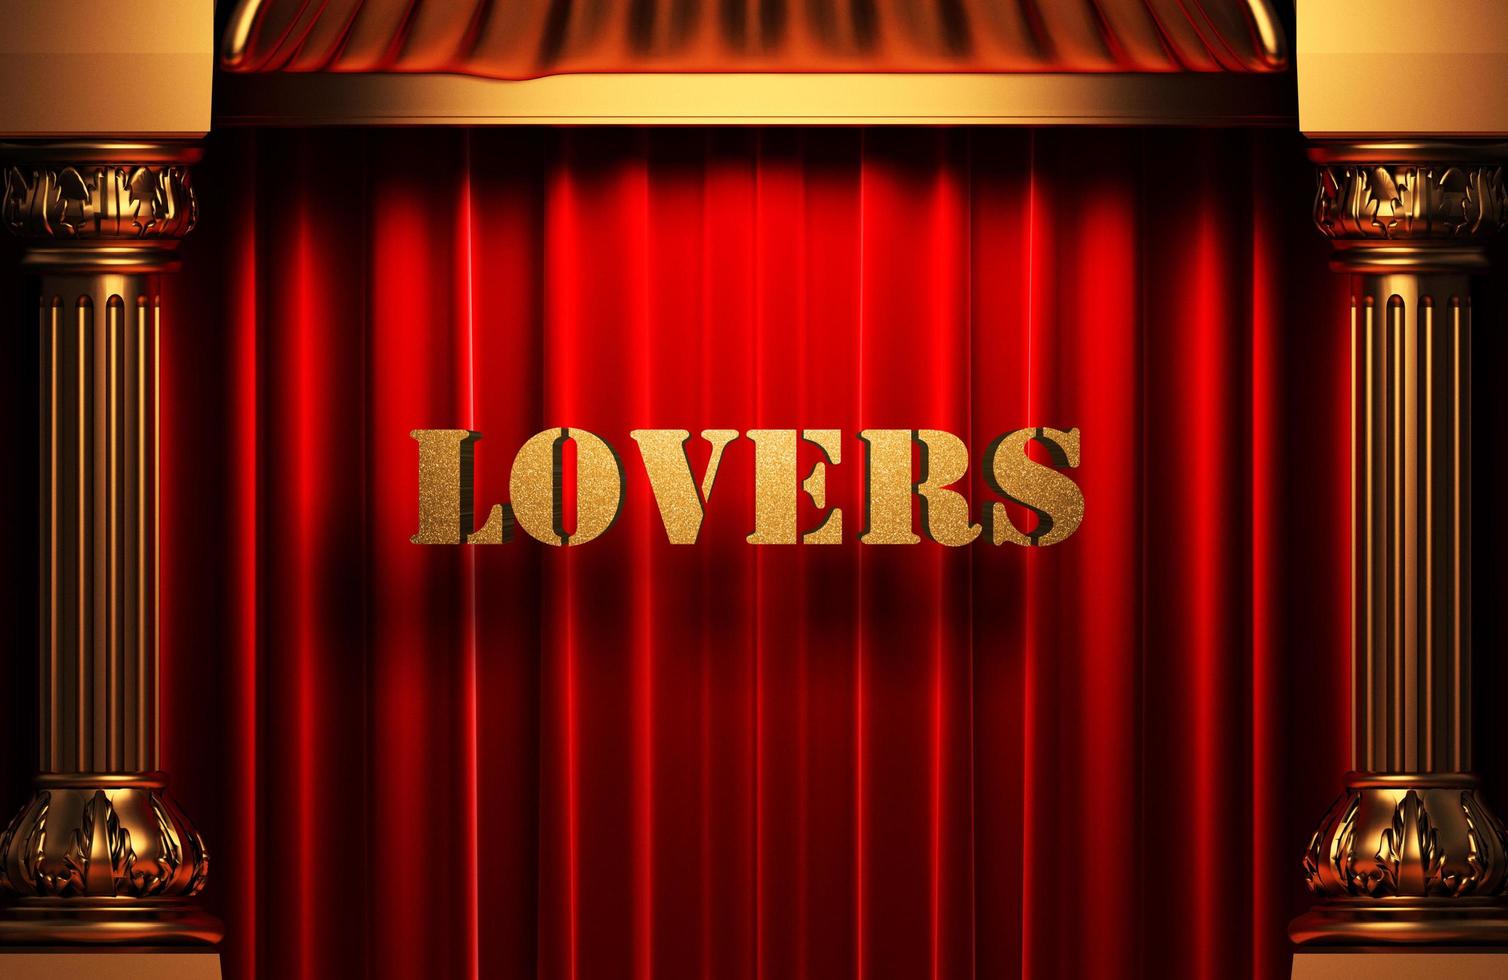 lovers golden word on red curtain photo